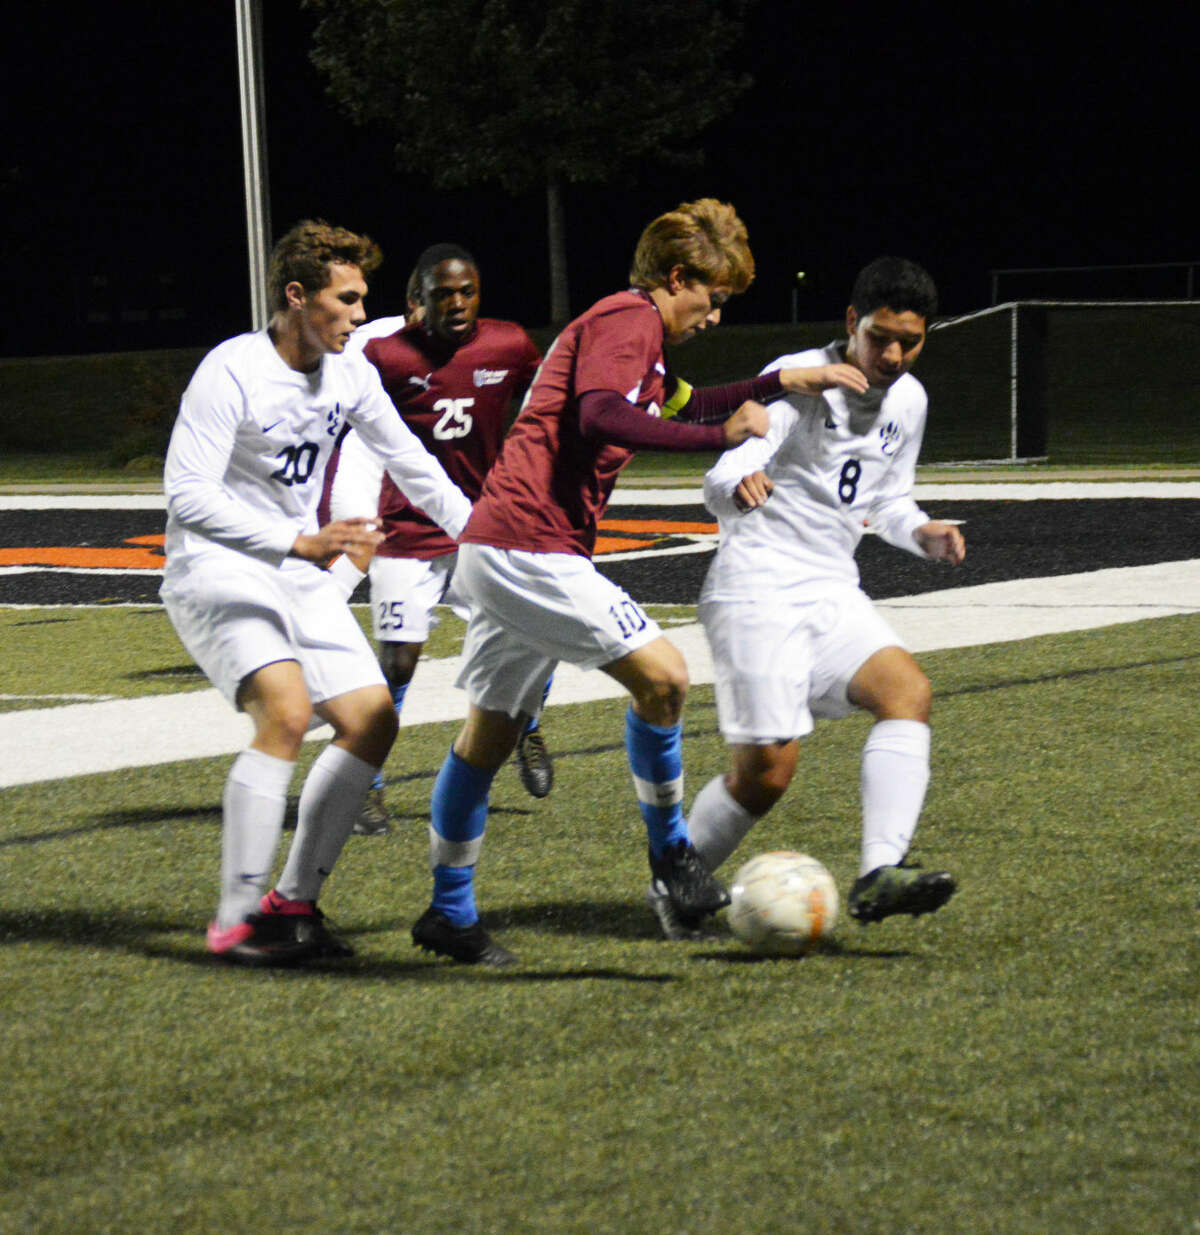 Edwardsville seniors Tyler Laub, left, and Brendan Hentz, right, defend a De Smet player during the first half on Friday.